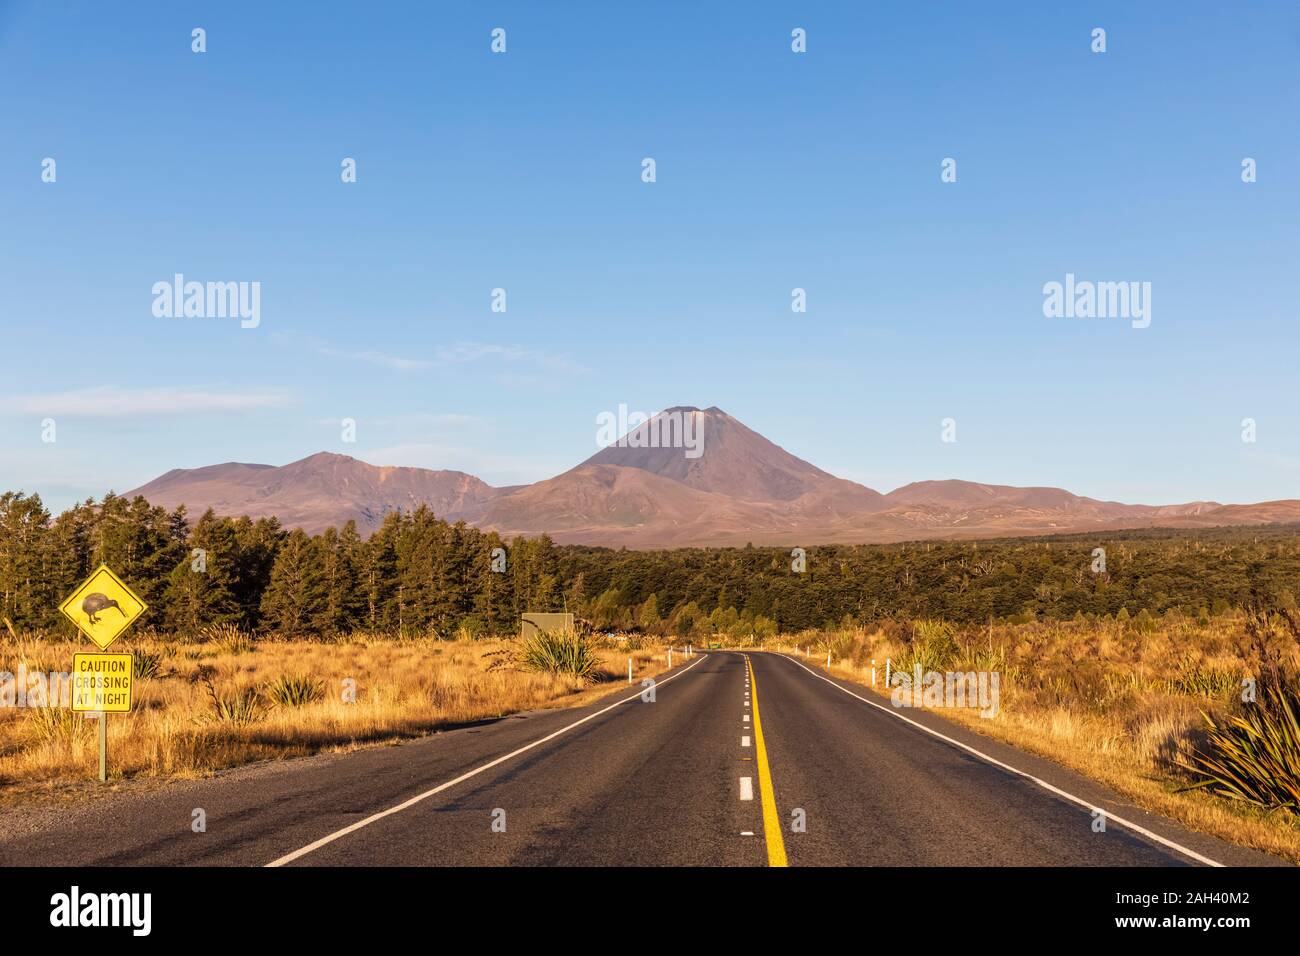 New Zealand, North Island, Kiwi bird crossing road sign by State Highway 48 with Mount Ngauruhoe looming in background Stock Photo